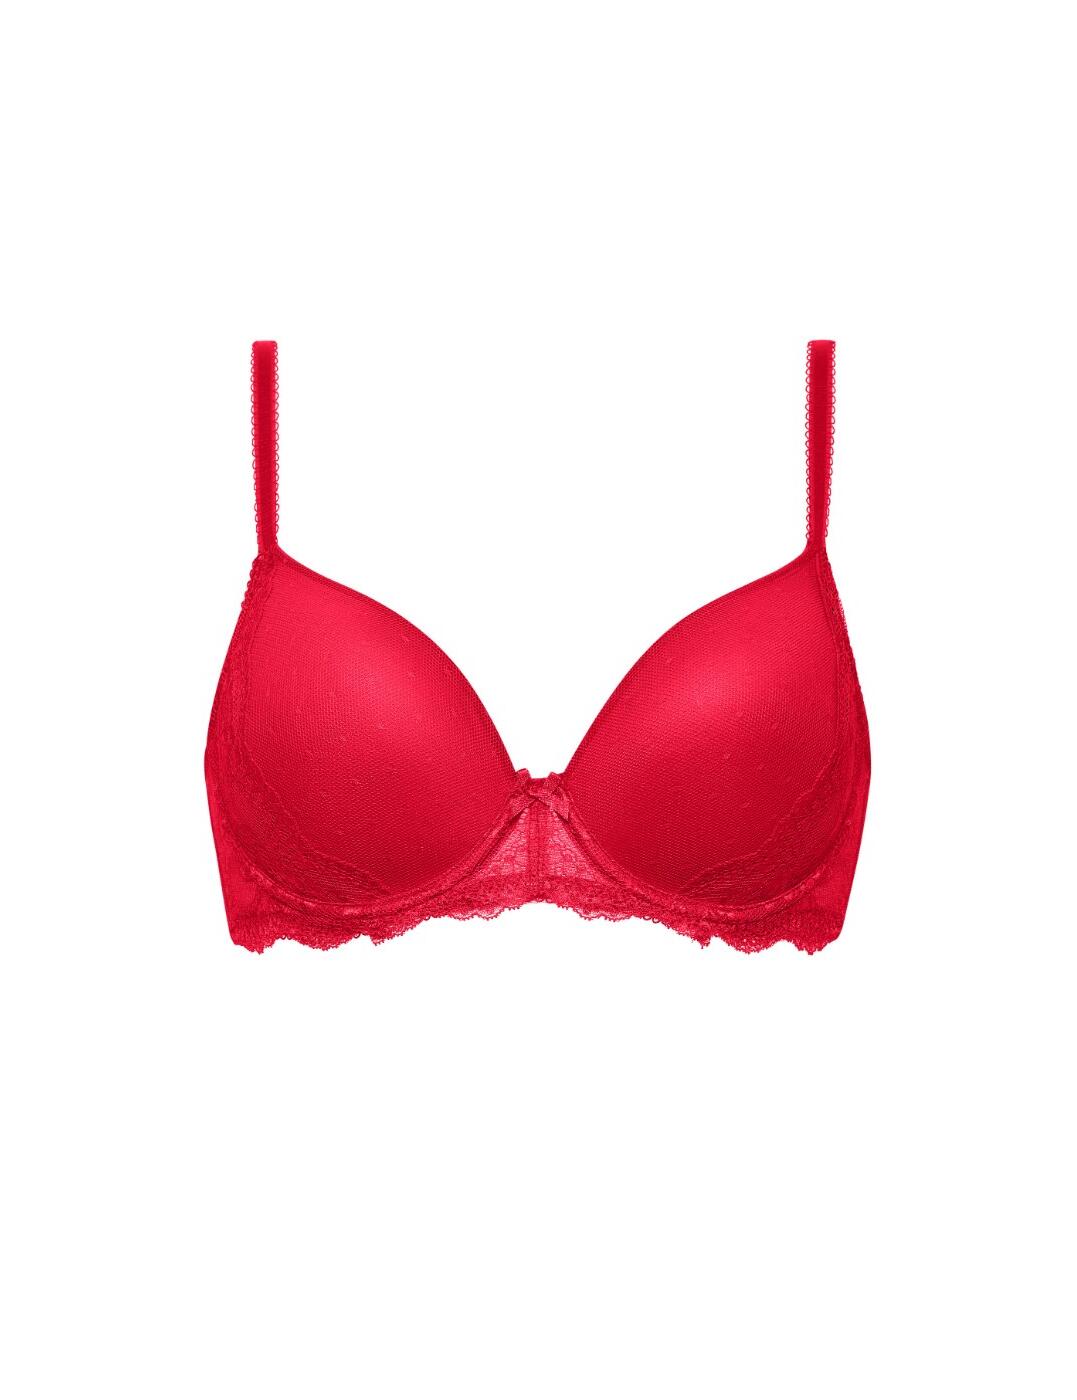 Figleaves Juliette Padded & Non-Padded Bra Reviews: 32GG - Big Cup